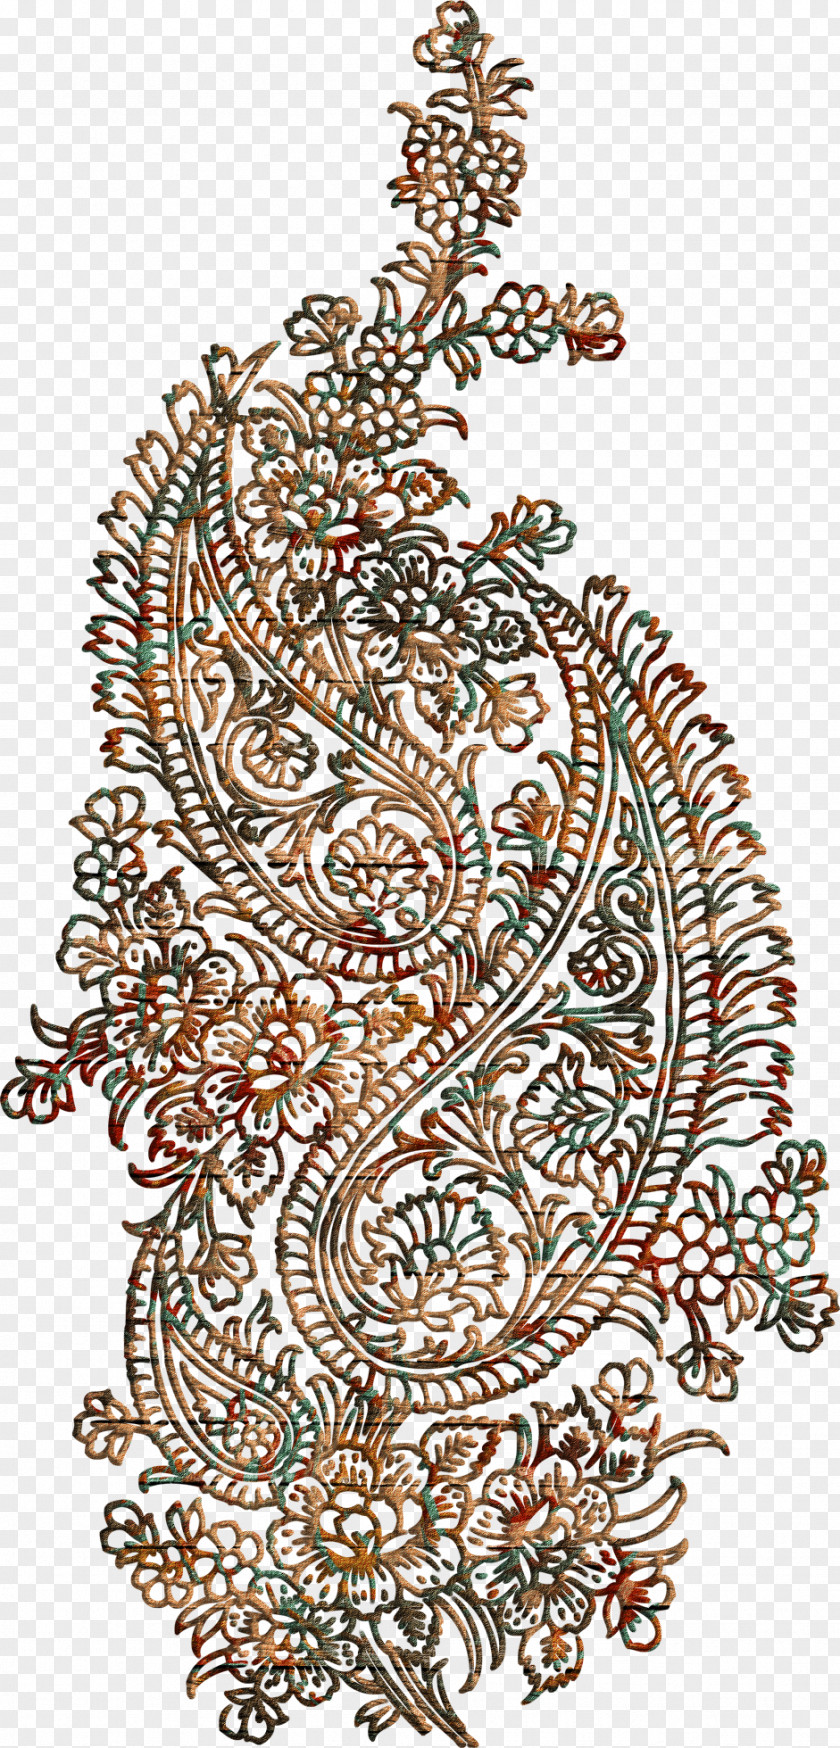 Paisley Textile Design Pattern Embroidery PNG